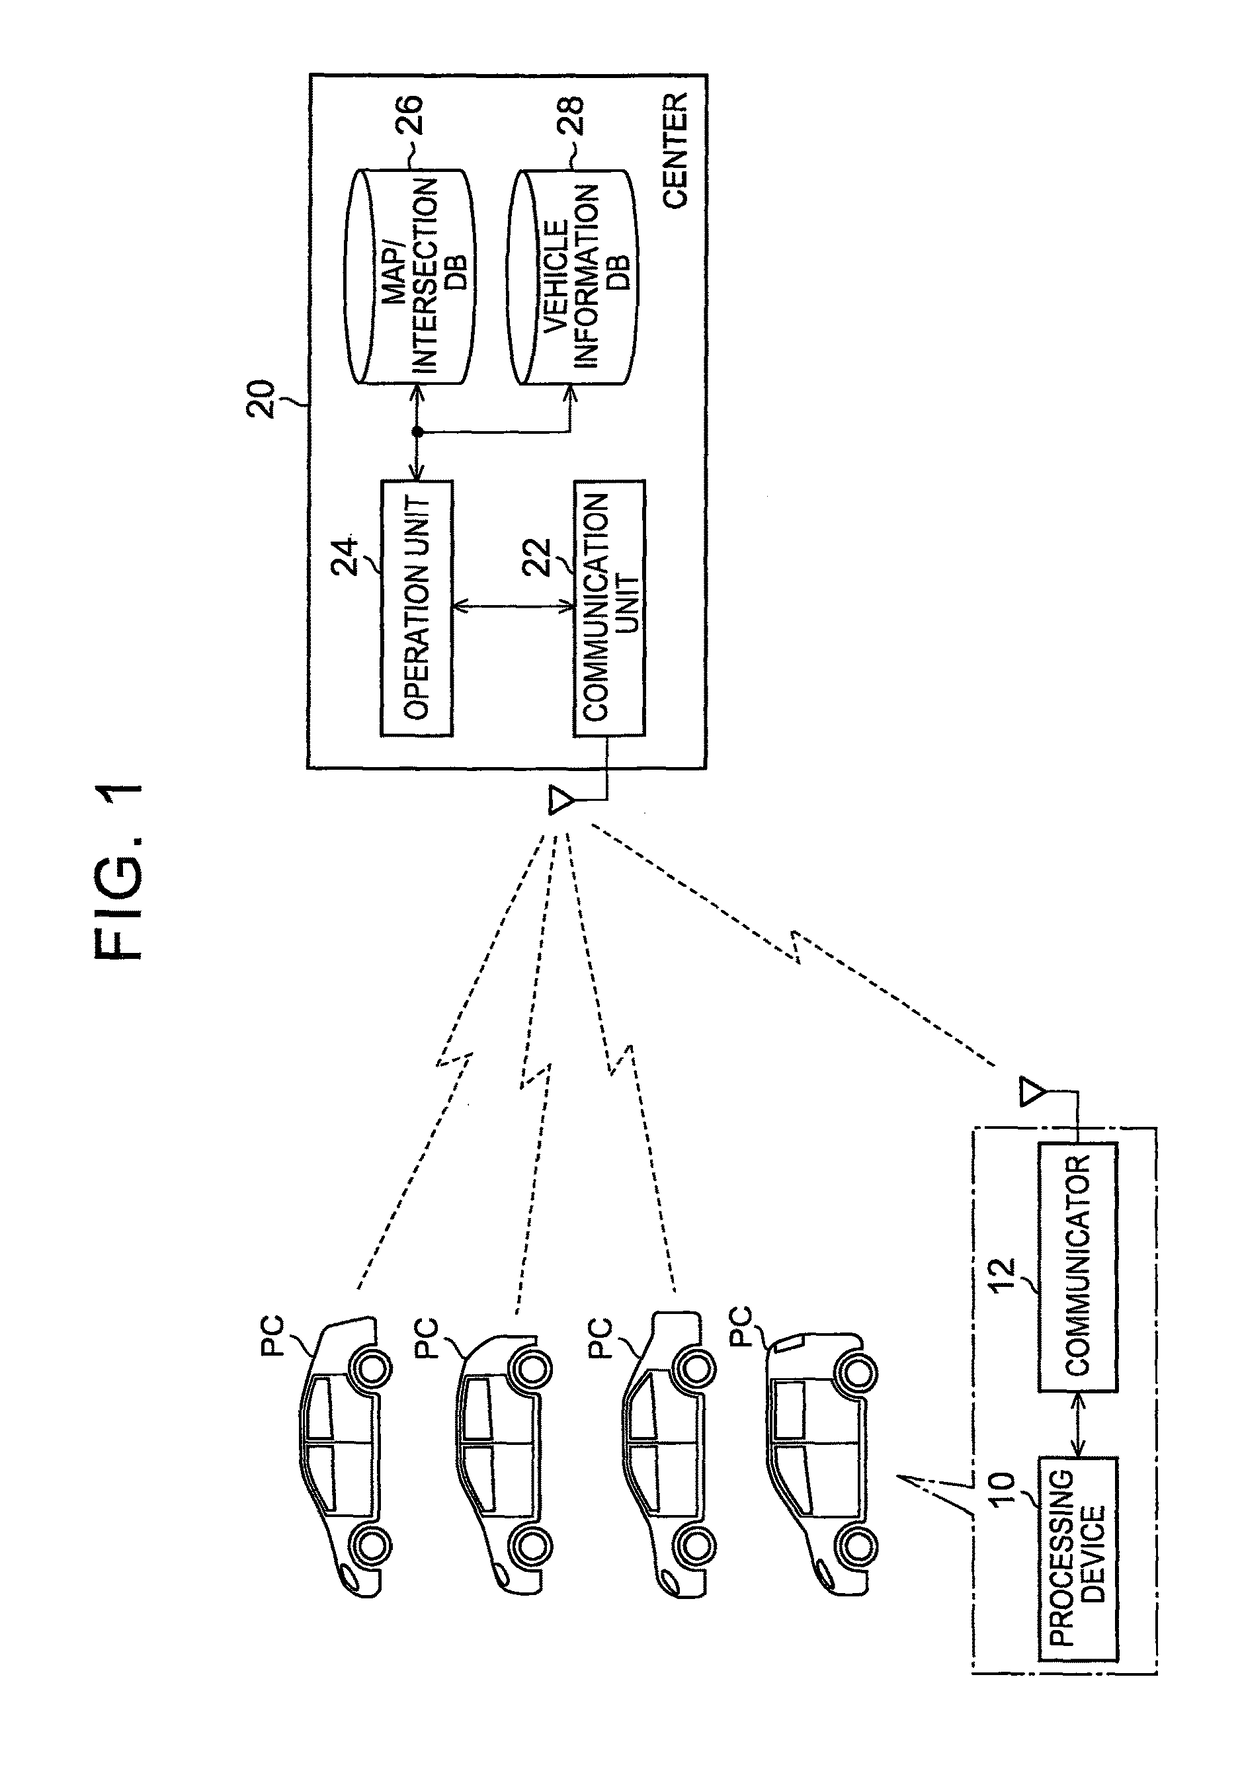 Traffic-light cycle length estimation device